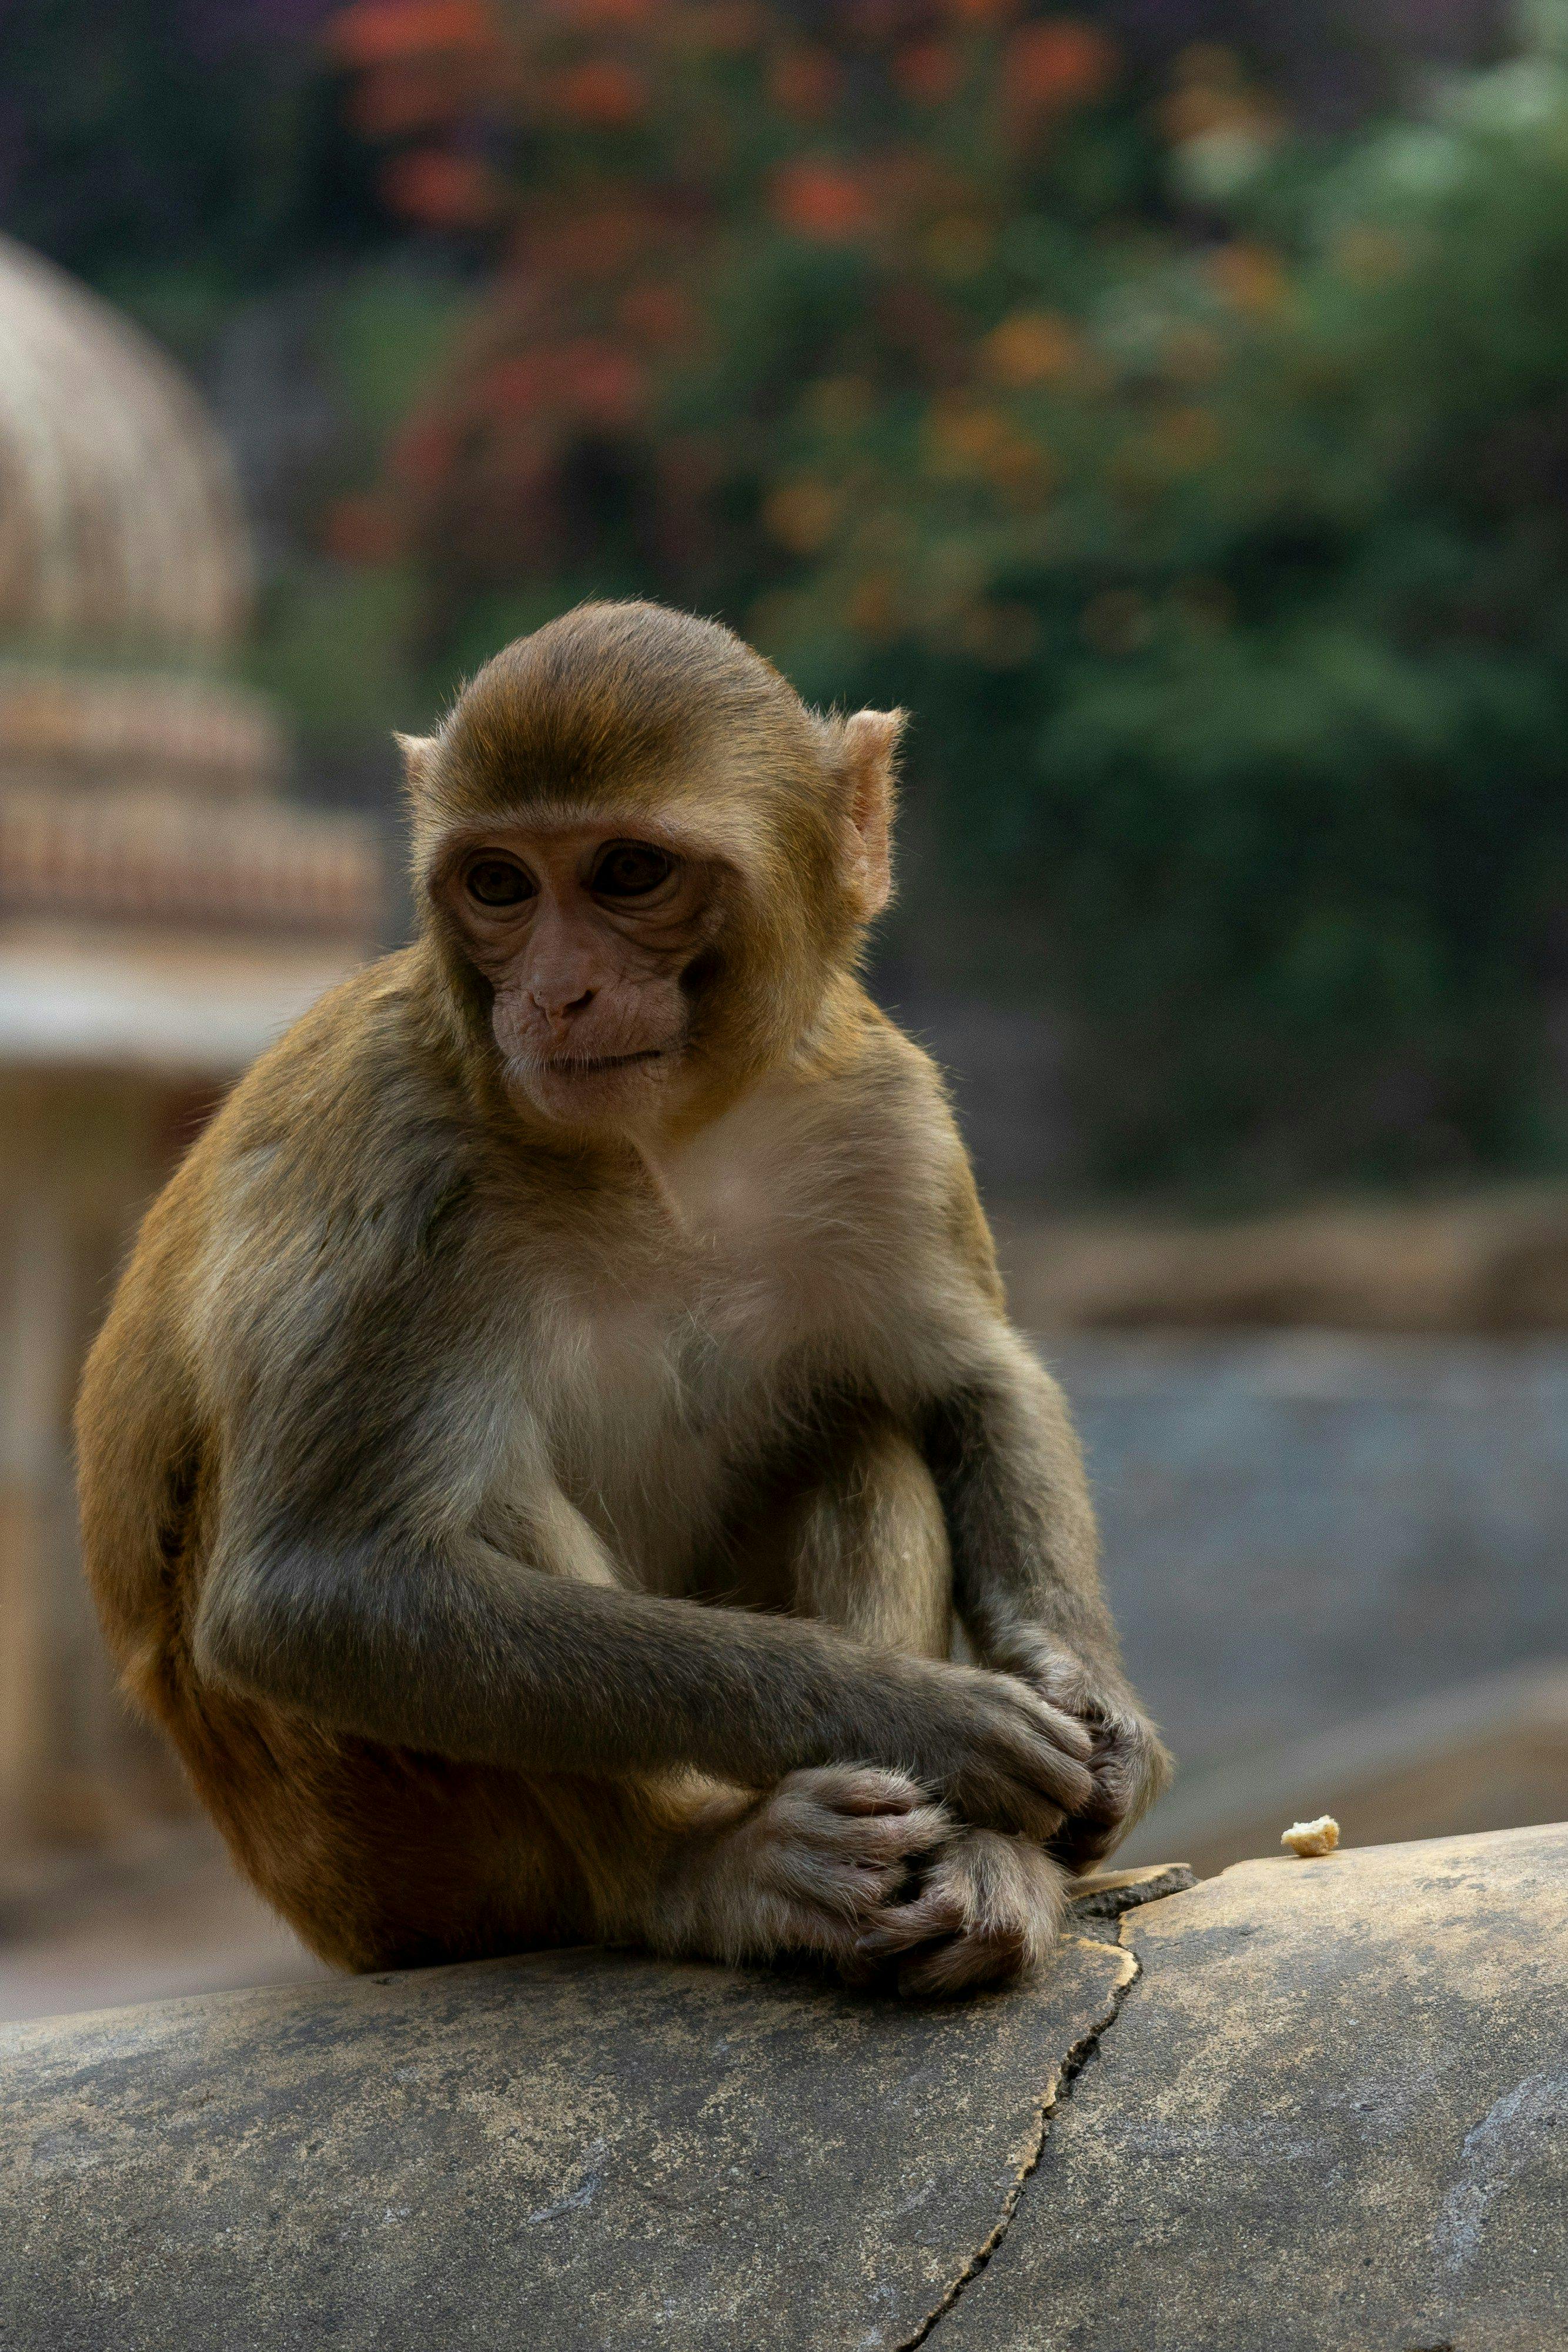 The B virus is spread through bites and scratches from macaque monkeys. 
Photo Credit: Martijn Vonk, Unsplash